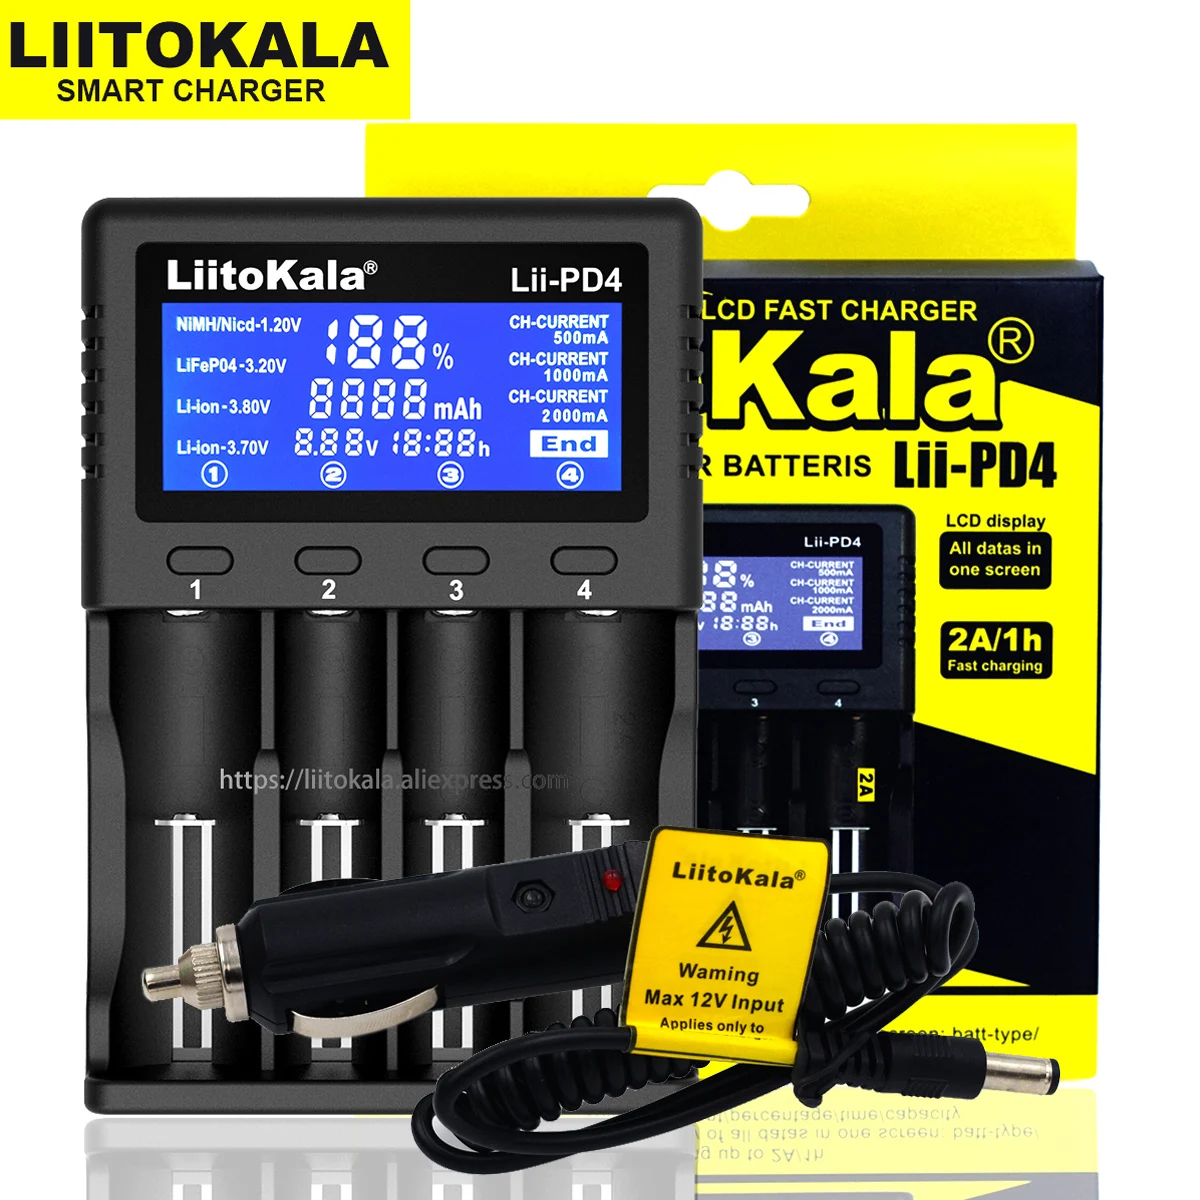 

Liitokala Lii-PD4 Lii-S2 Lii-S4 Lii-S6 LCD 3.2V 3.7V 3.8V 1.2V 18650 18350 26650 20700 Lithium-ion LiFePO4 Battery Charger